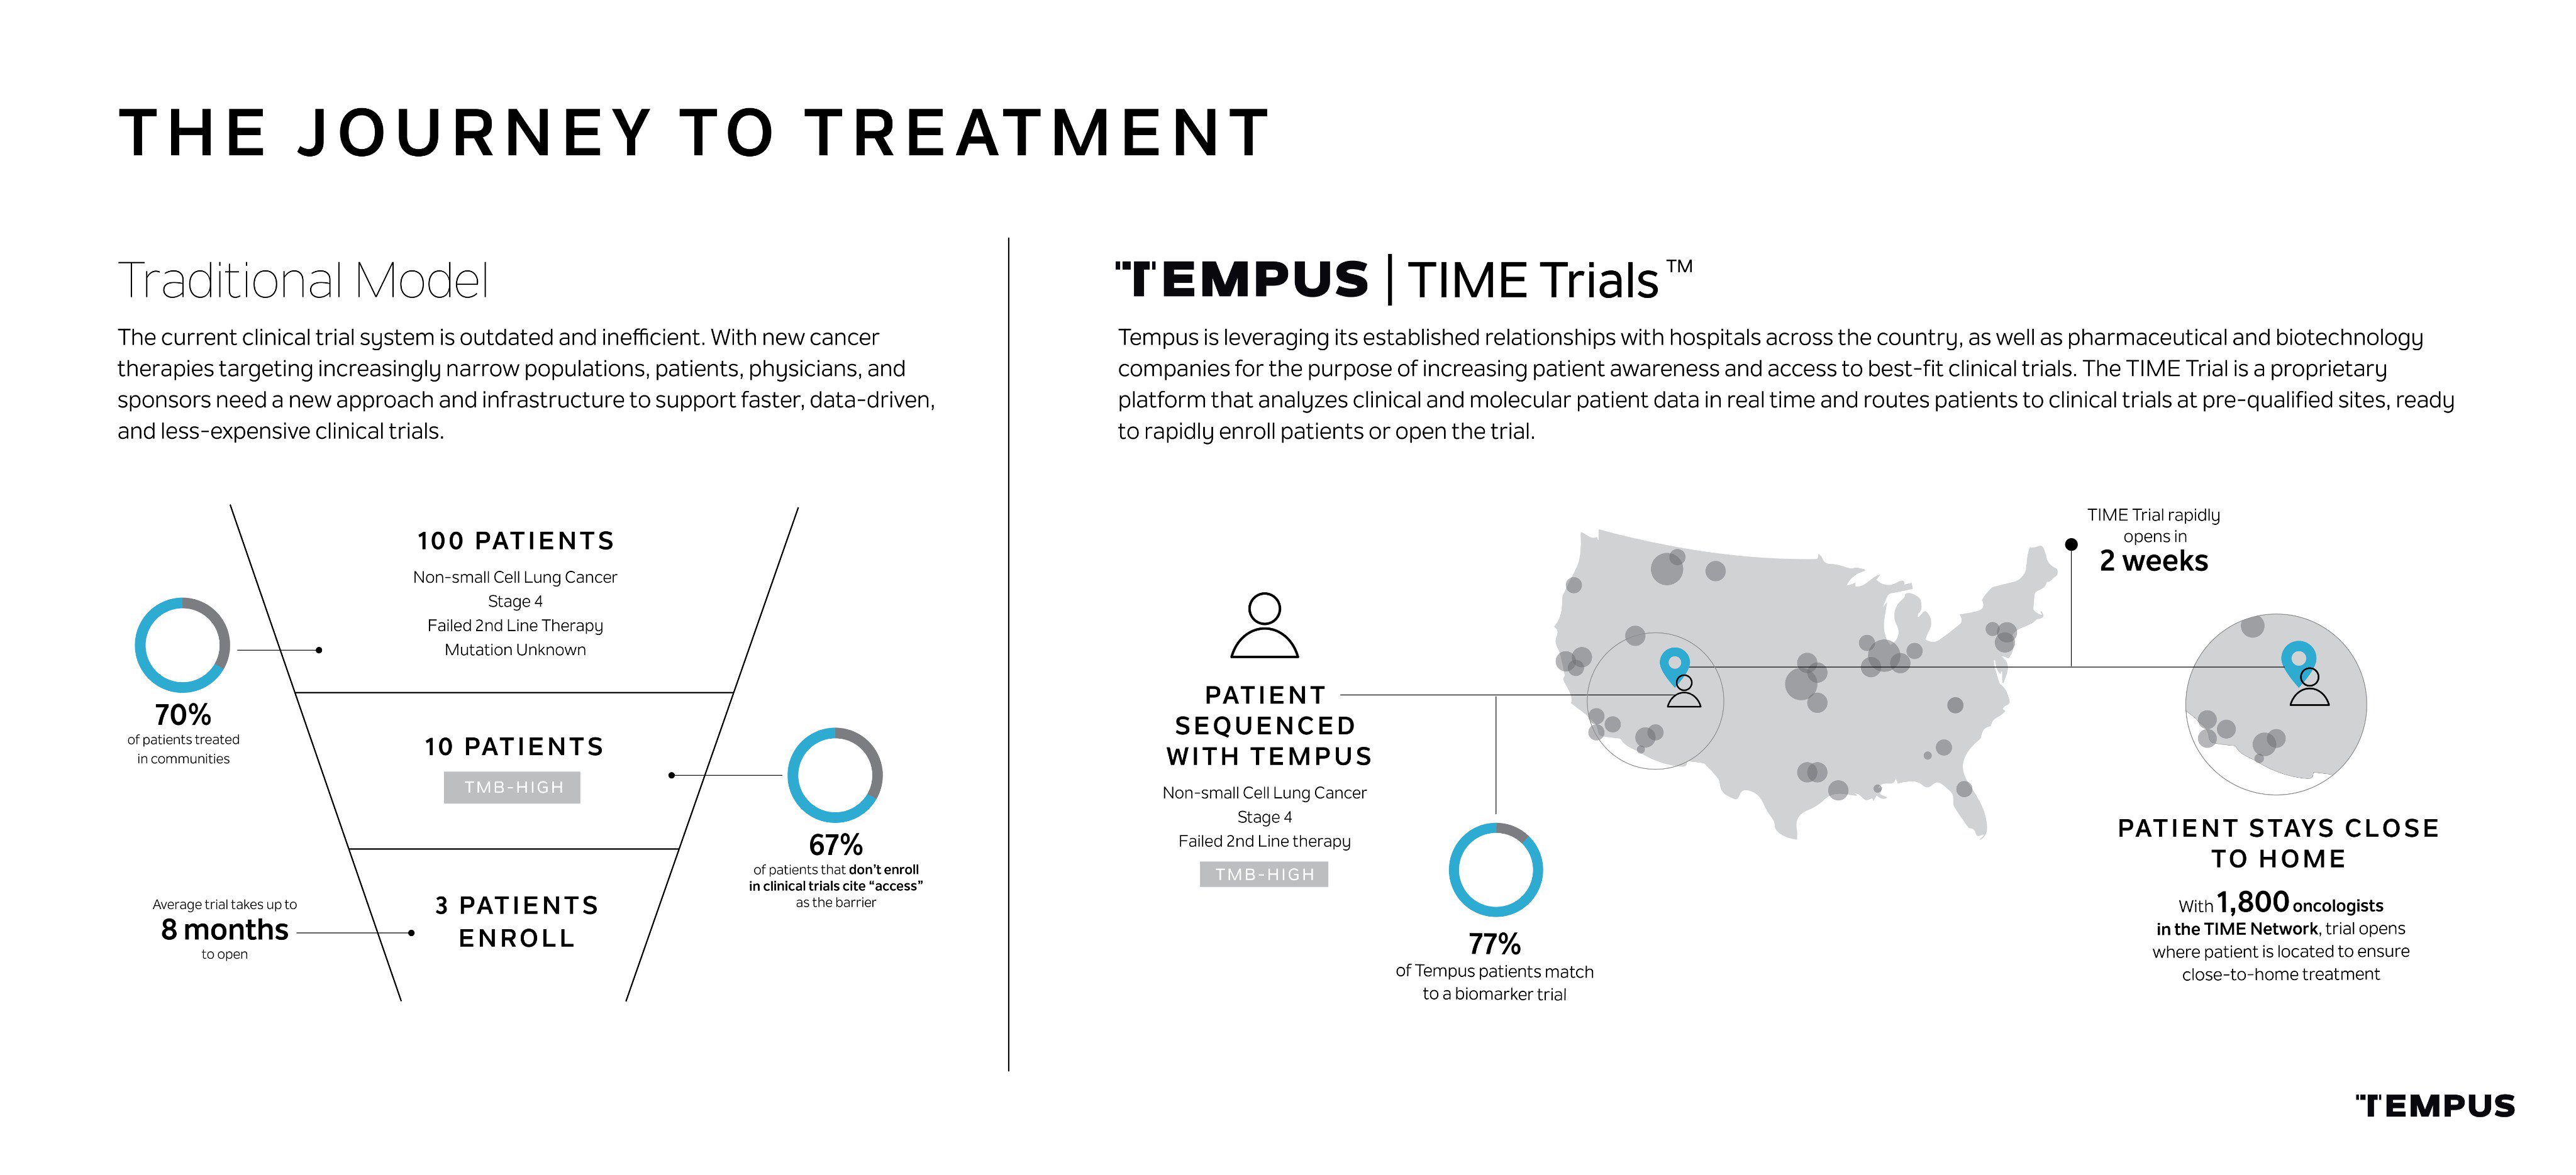 Tempus on Twitter: "Tempus announces the TIME Trial Program, a new service that leverages artificial intelligence to clinical trials at sites with cancer patients. Visit us at #ASCO19 booth